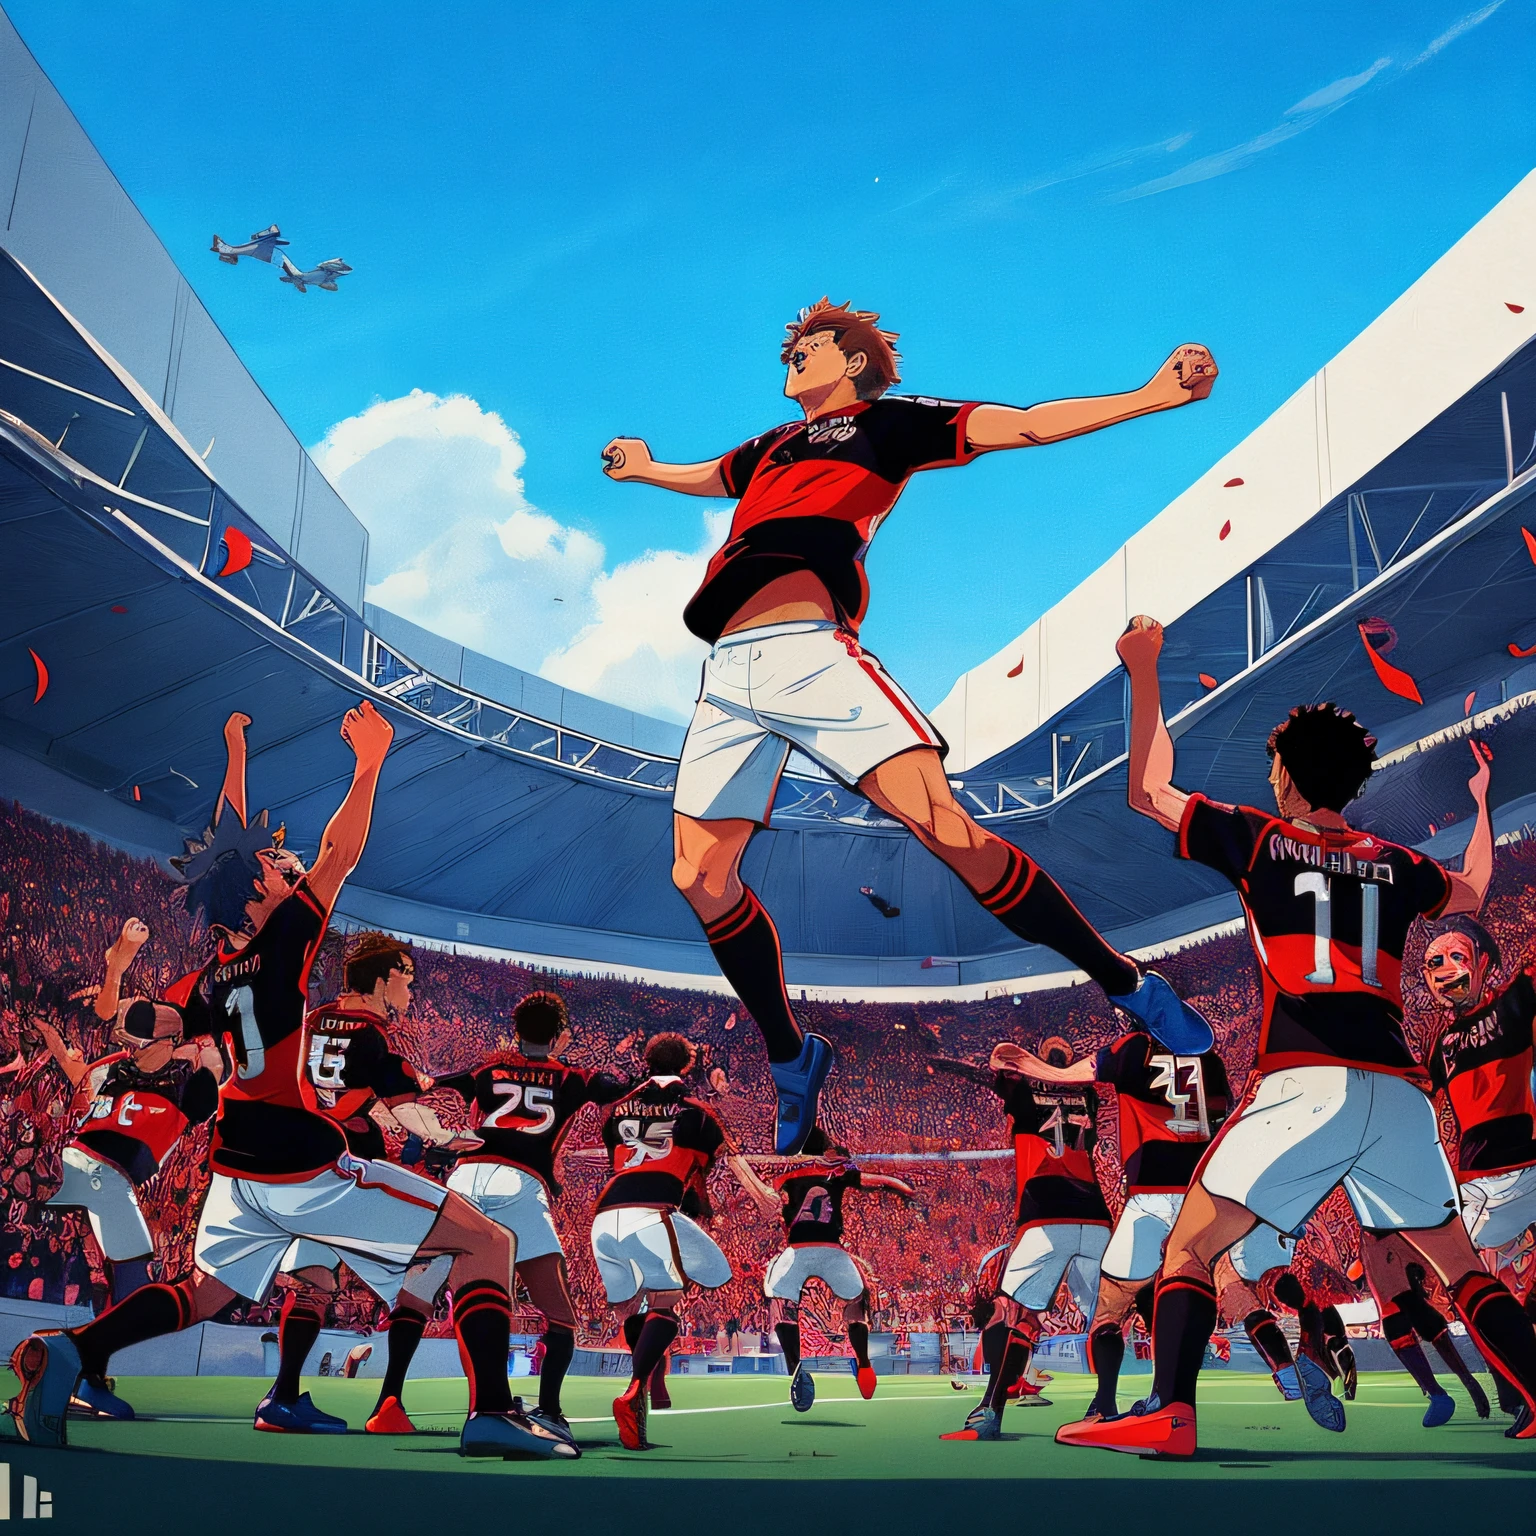 Illustration of a soccer player jumping in the air to catch a ball, inspirado em Oswaldo Viteri, Directed by: Camilo Mori, Directed by: Willian Murai, official fan art, an epic anime of tuff luck, Directed by: Kuno Veeber, Anime de hoje ainda em destaque, fanart oficial, 🚿🗝📝, 4K HD papel de parede ilustrativo